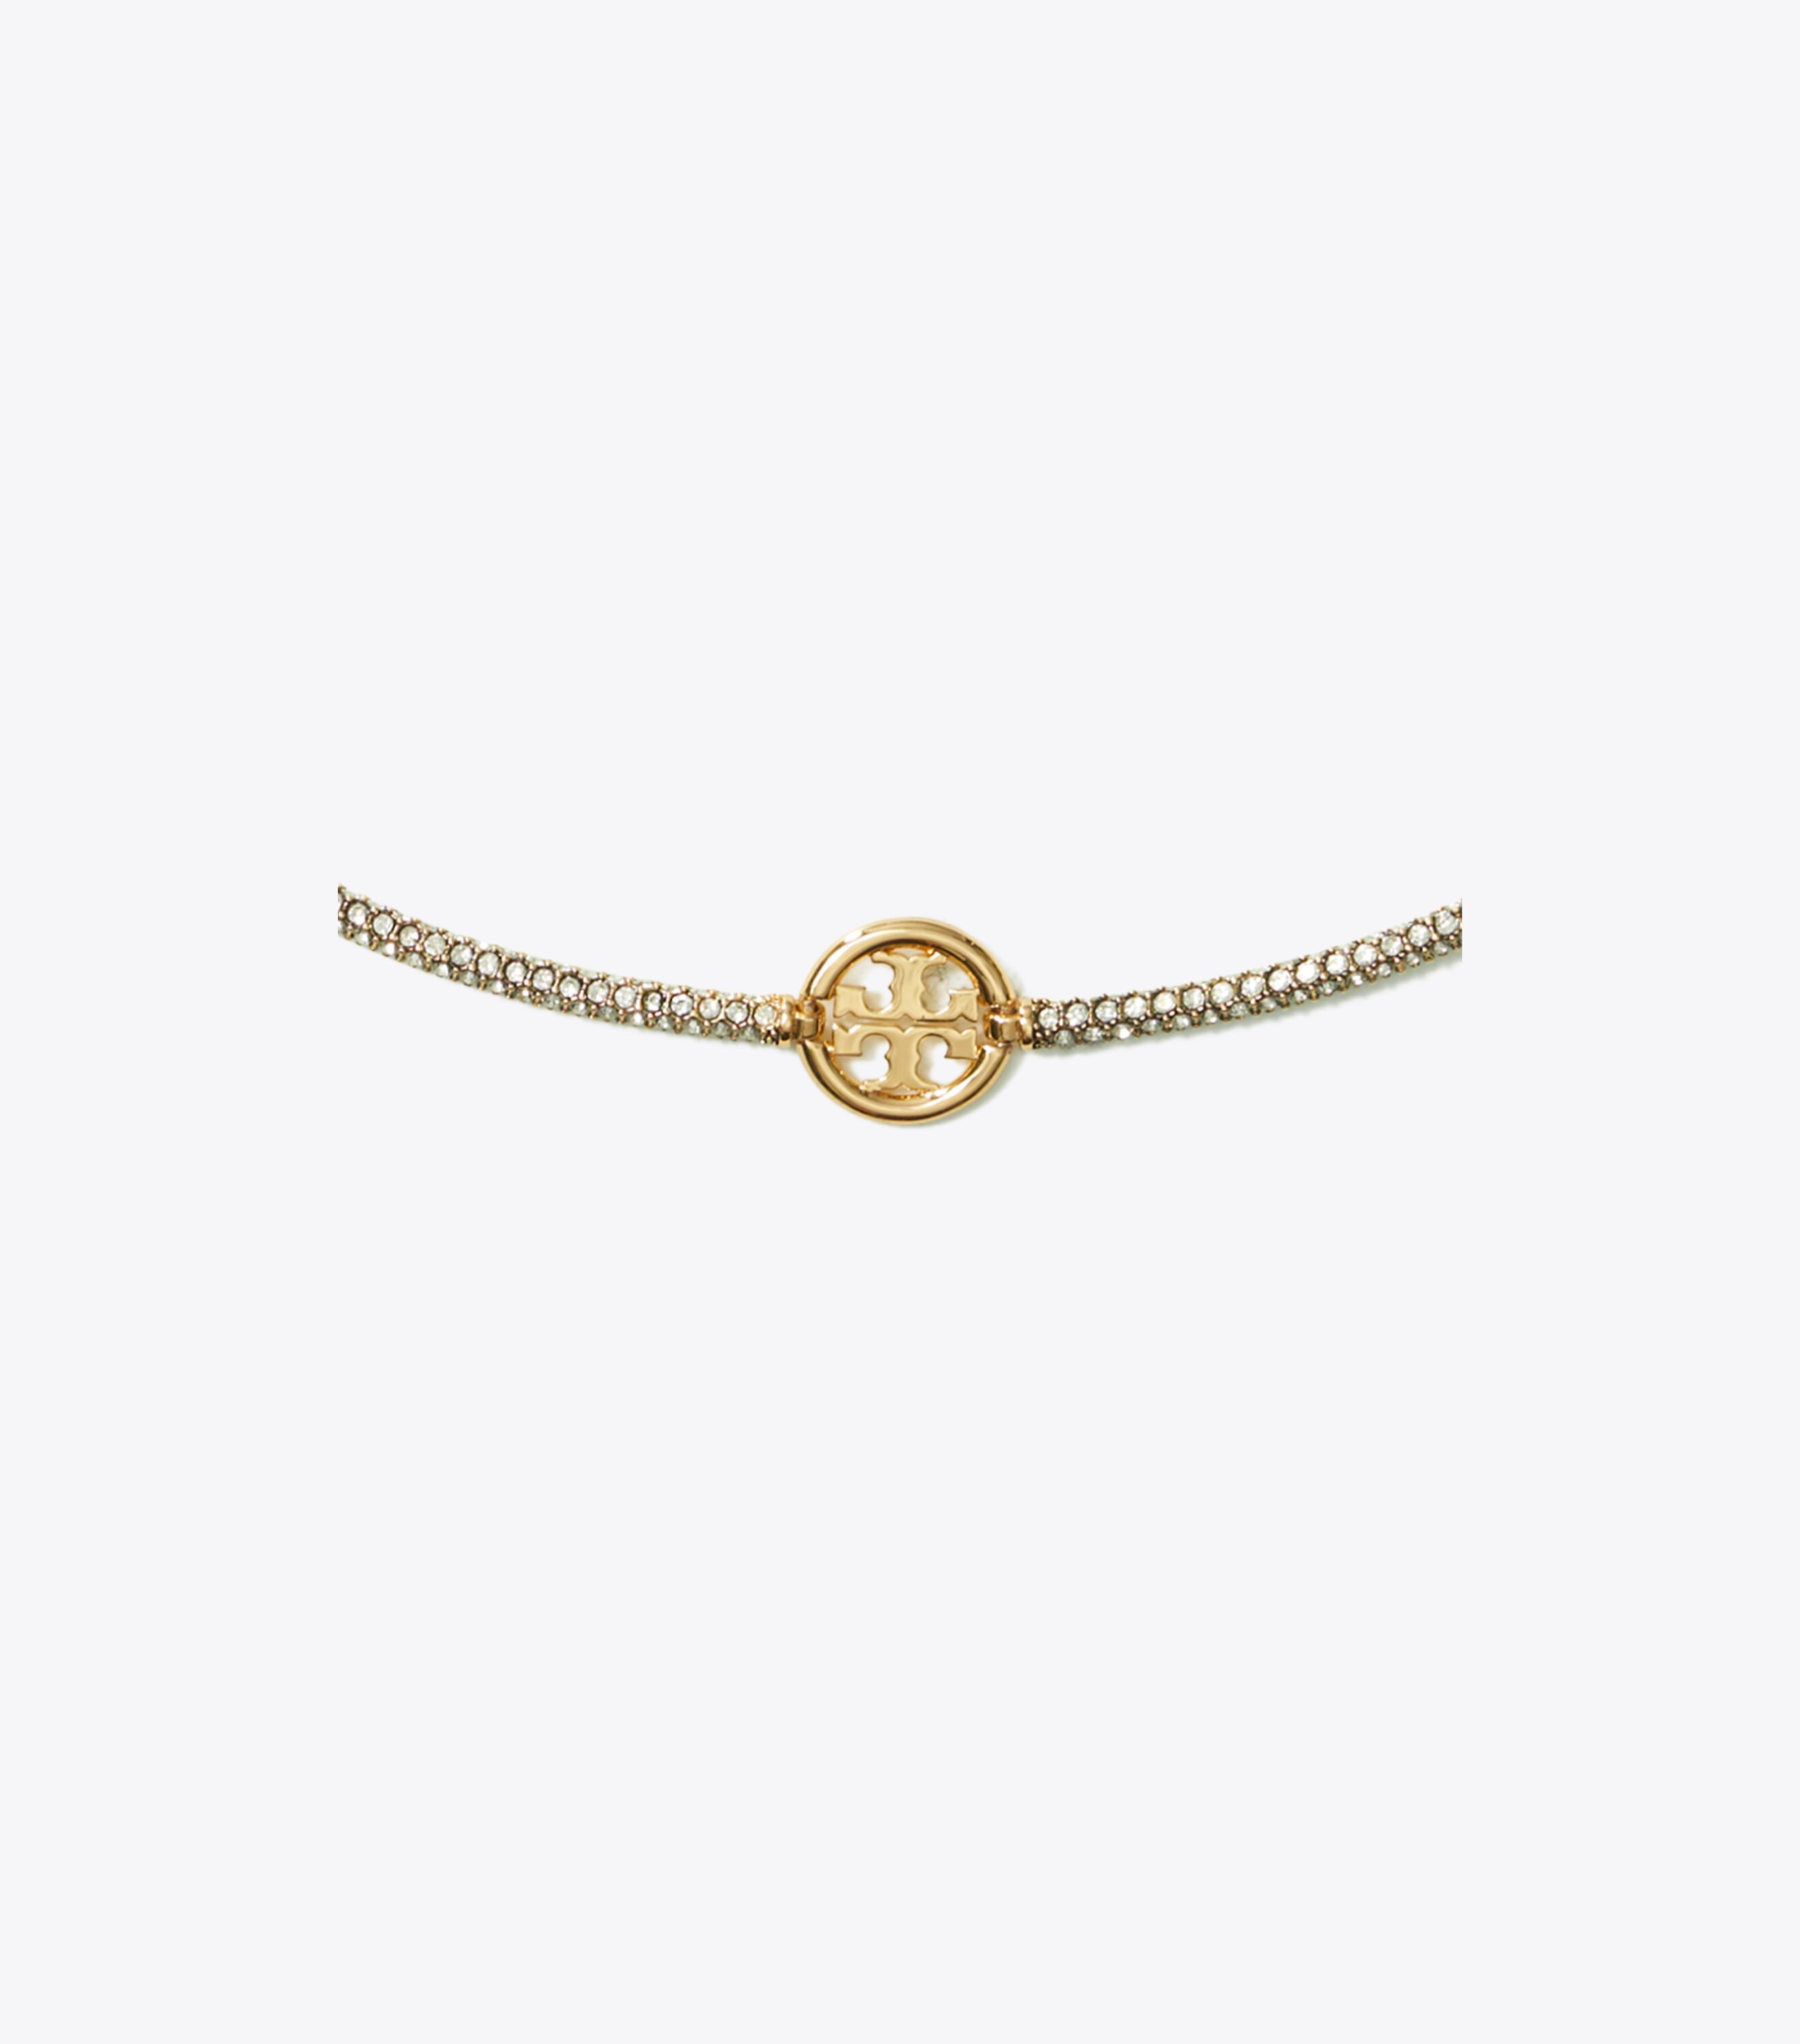 Tory Burch Kira Pearl Delicate Necklace | Shopbop